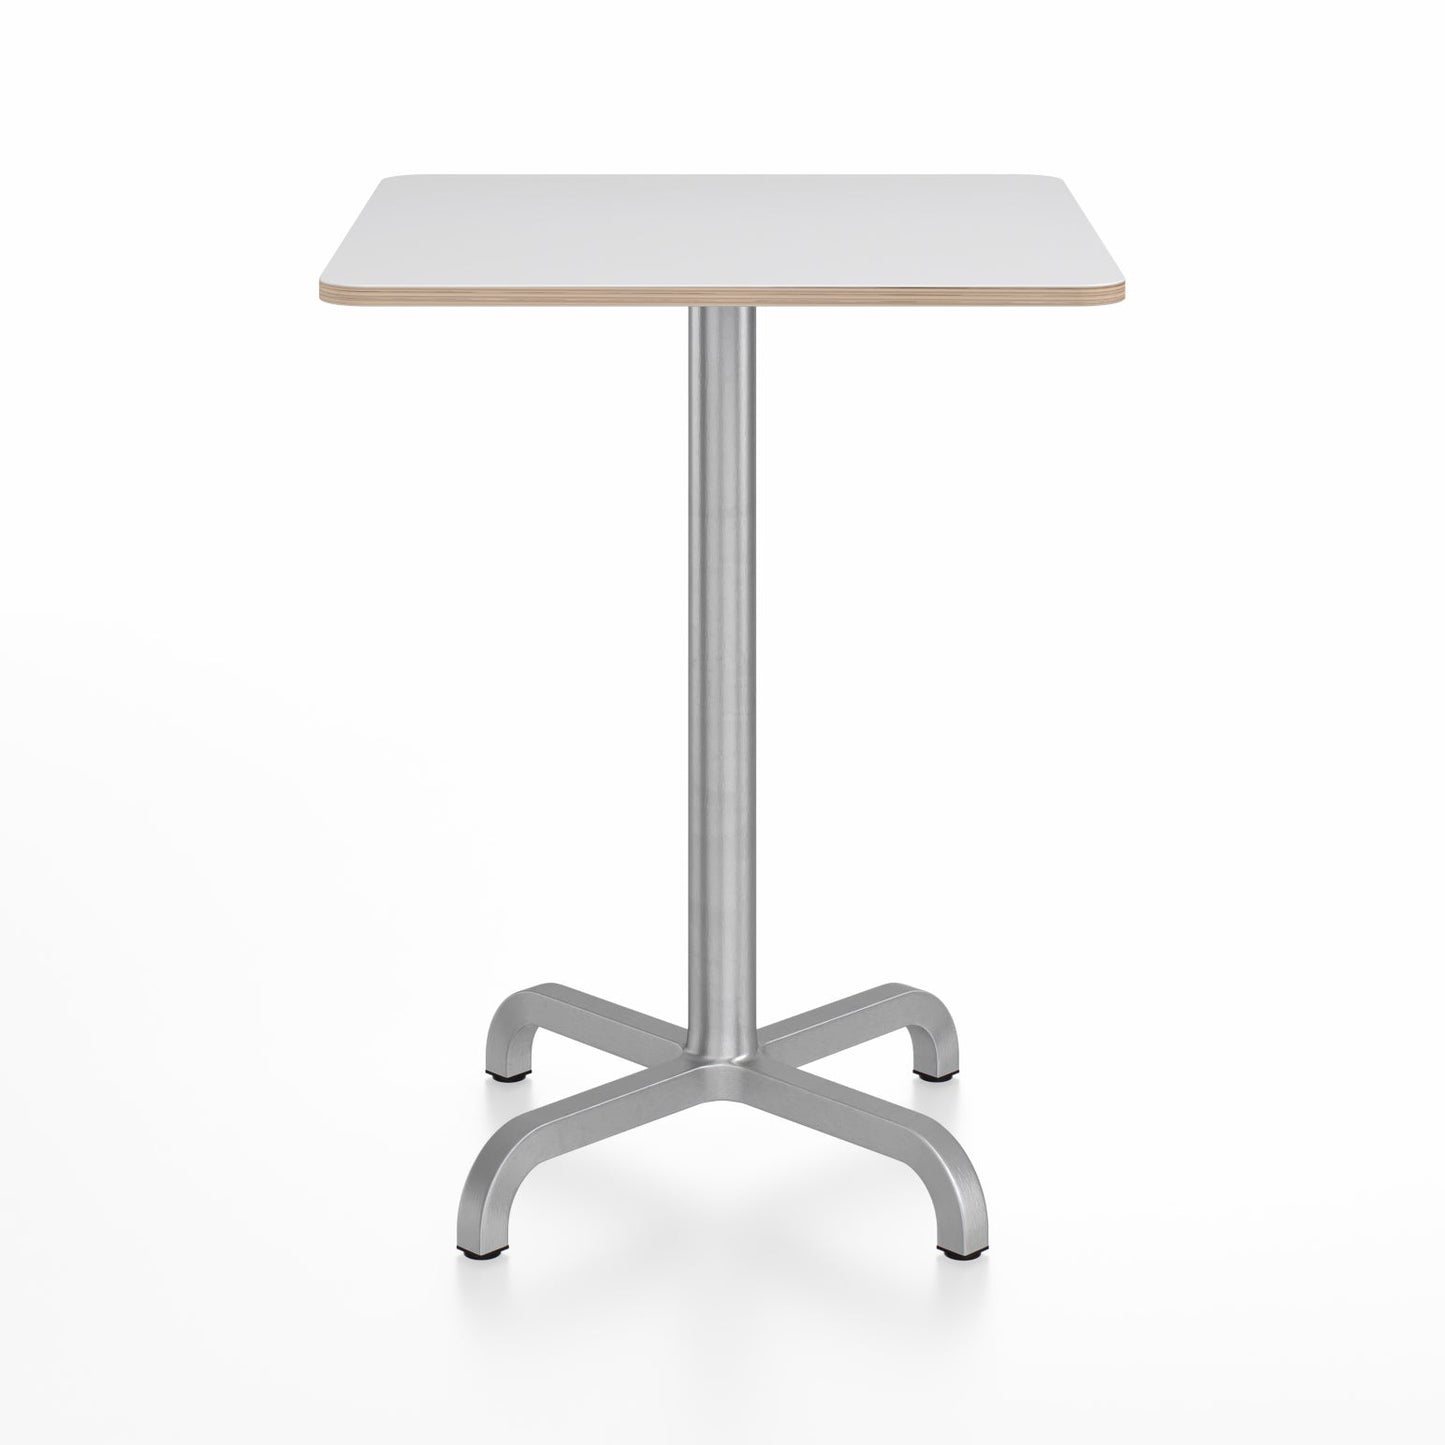 20-06 Square Cafe Table